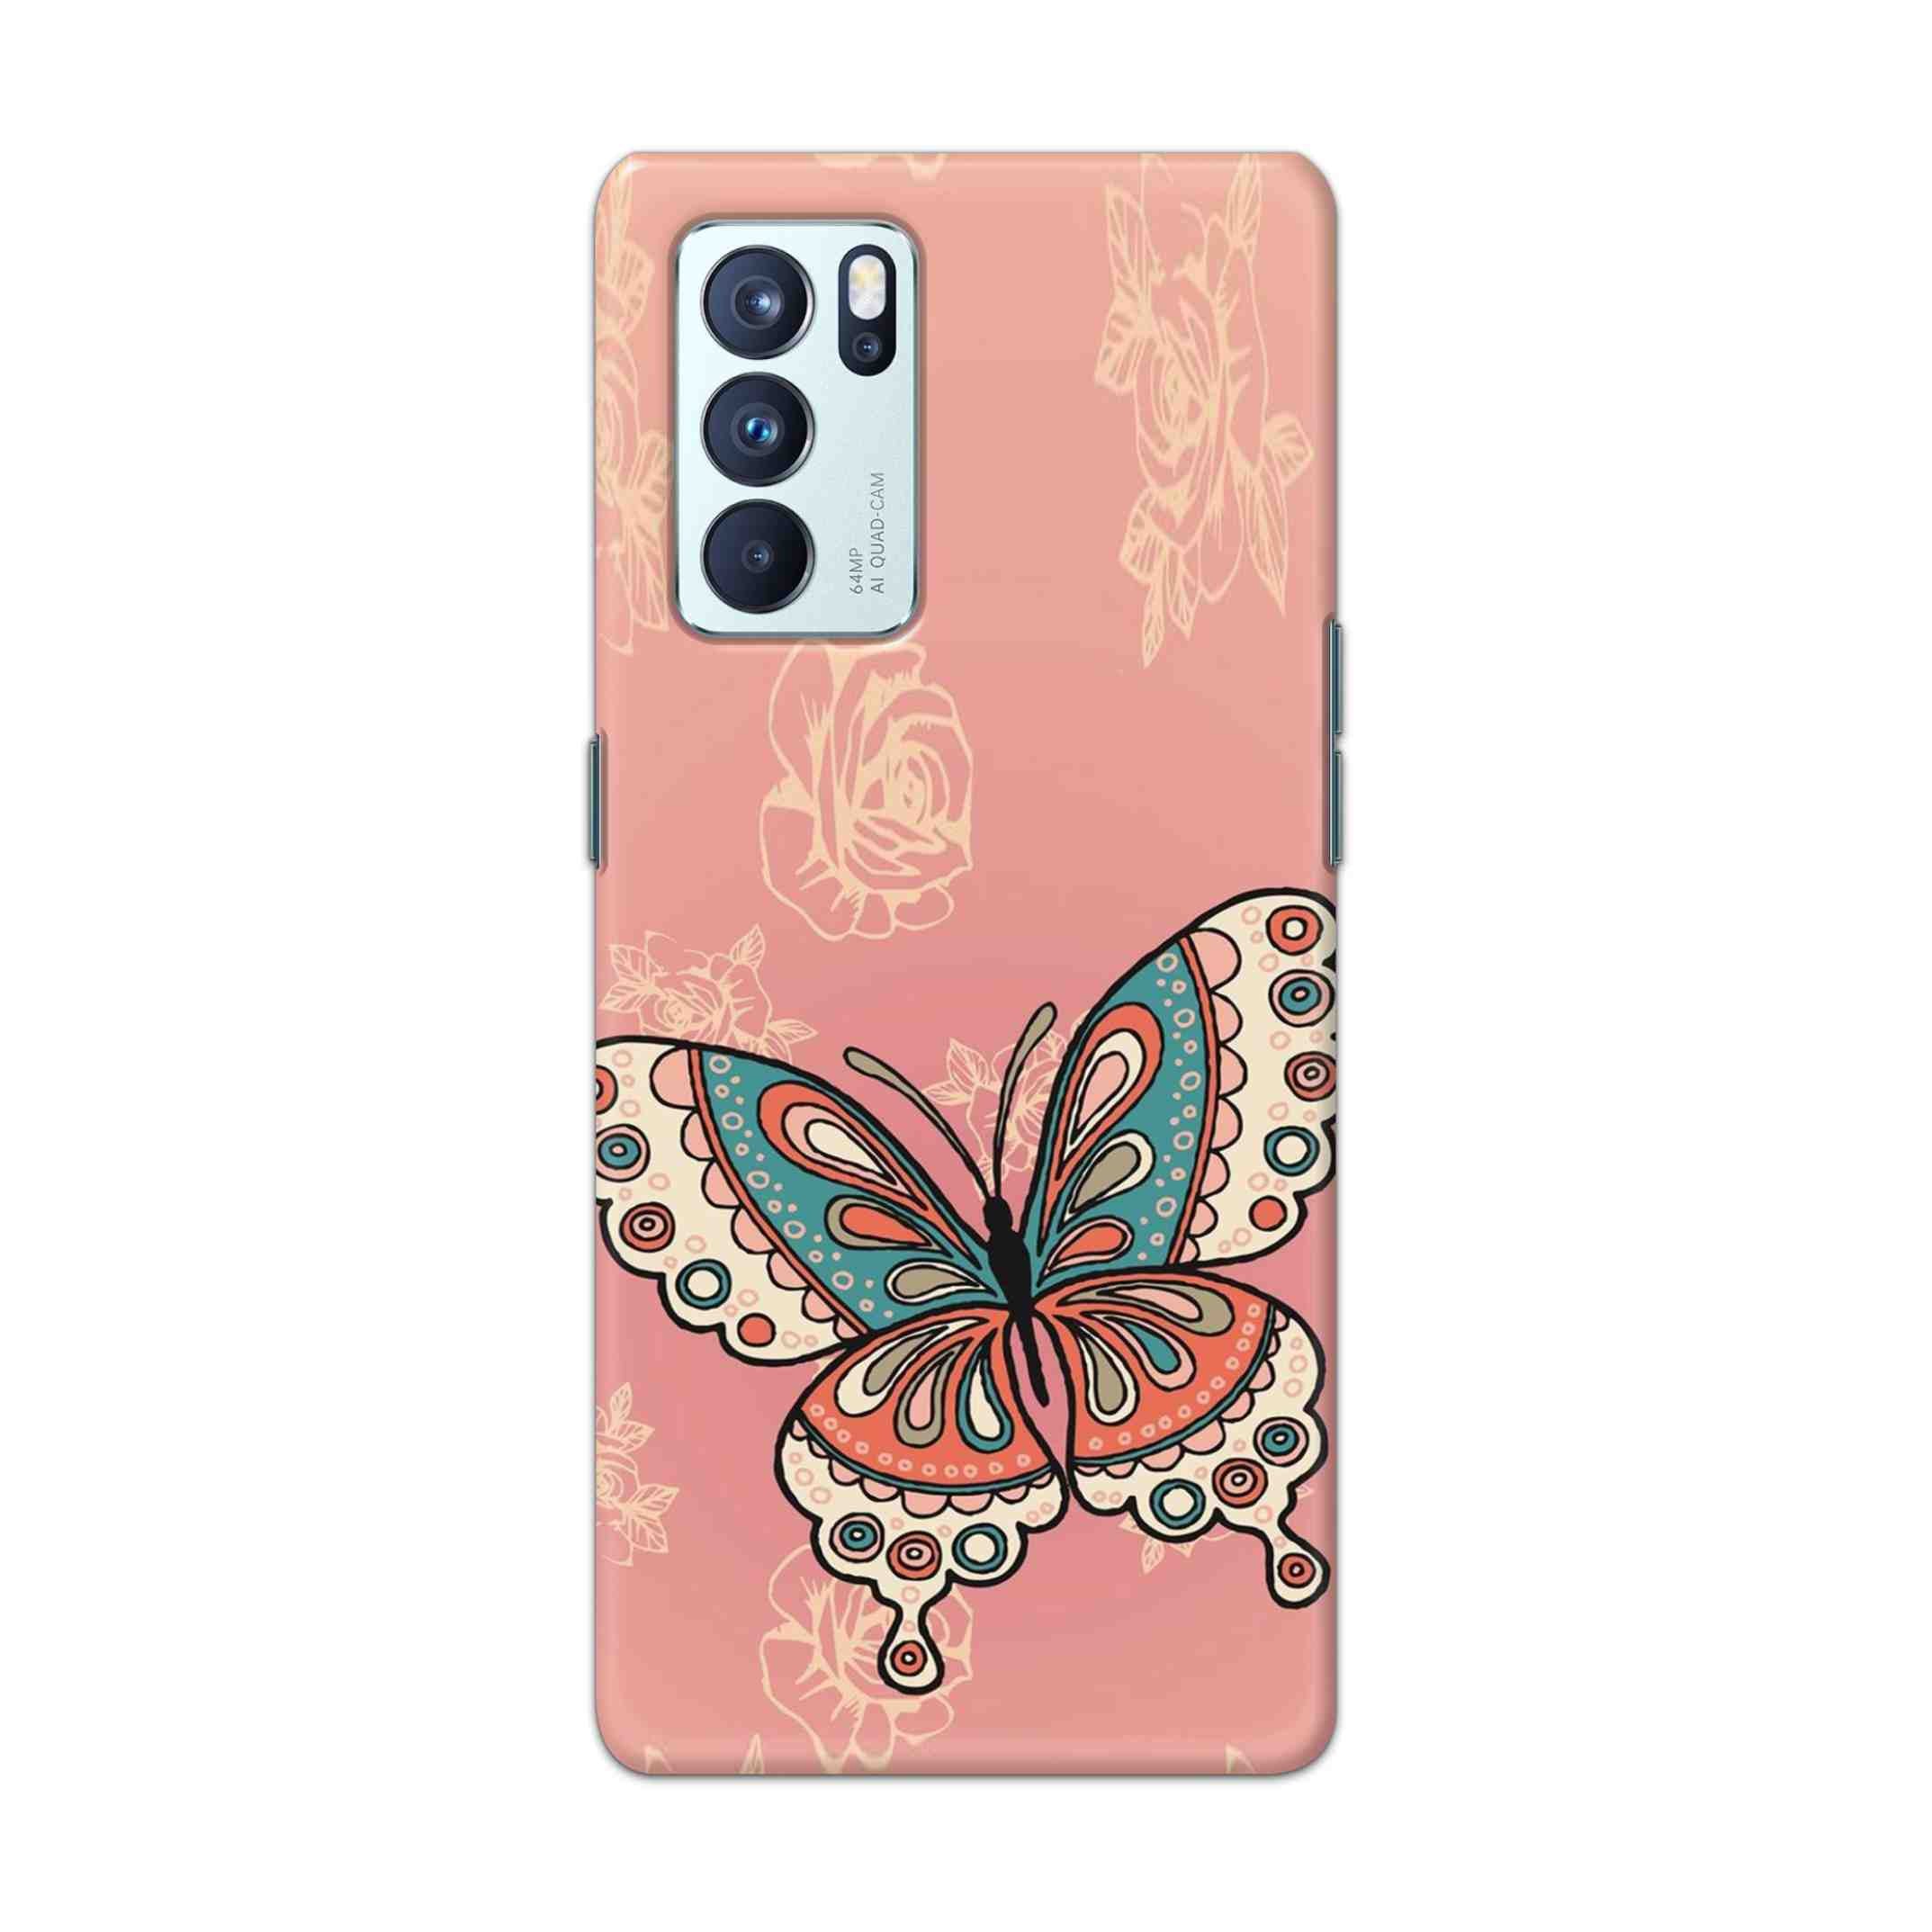 Buy Butterfly Hard Back Mobile Phone Case Cover For OPPO Reno 6 Pro 5G Online